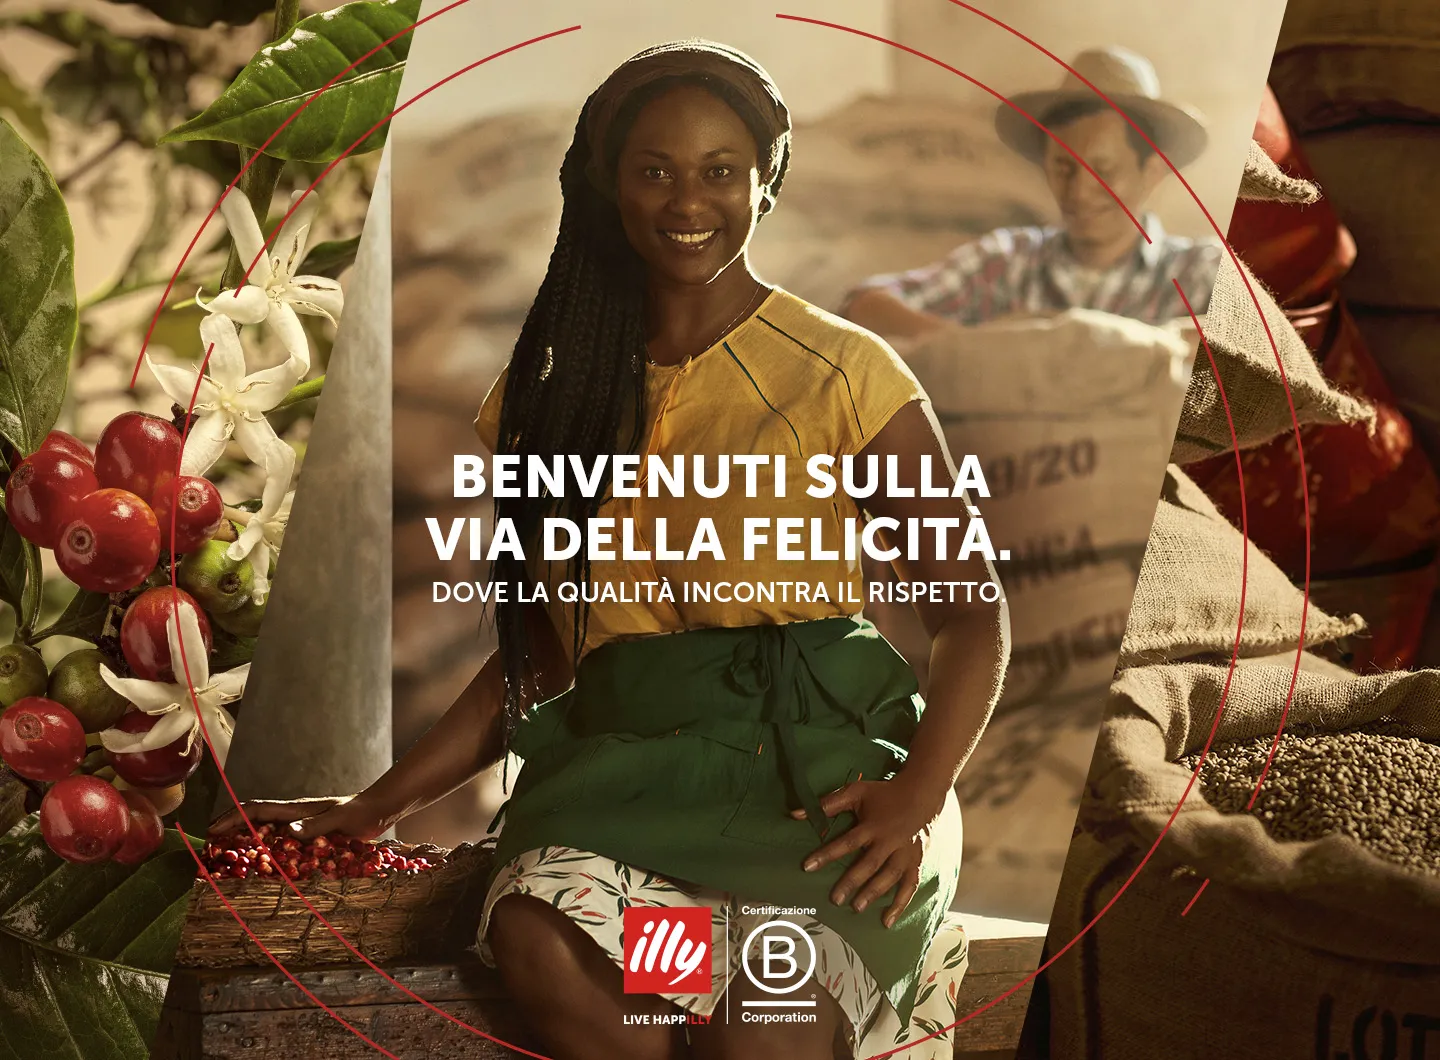 illy – Welcome on the road to happiness. Where quality meets respect.